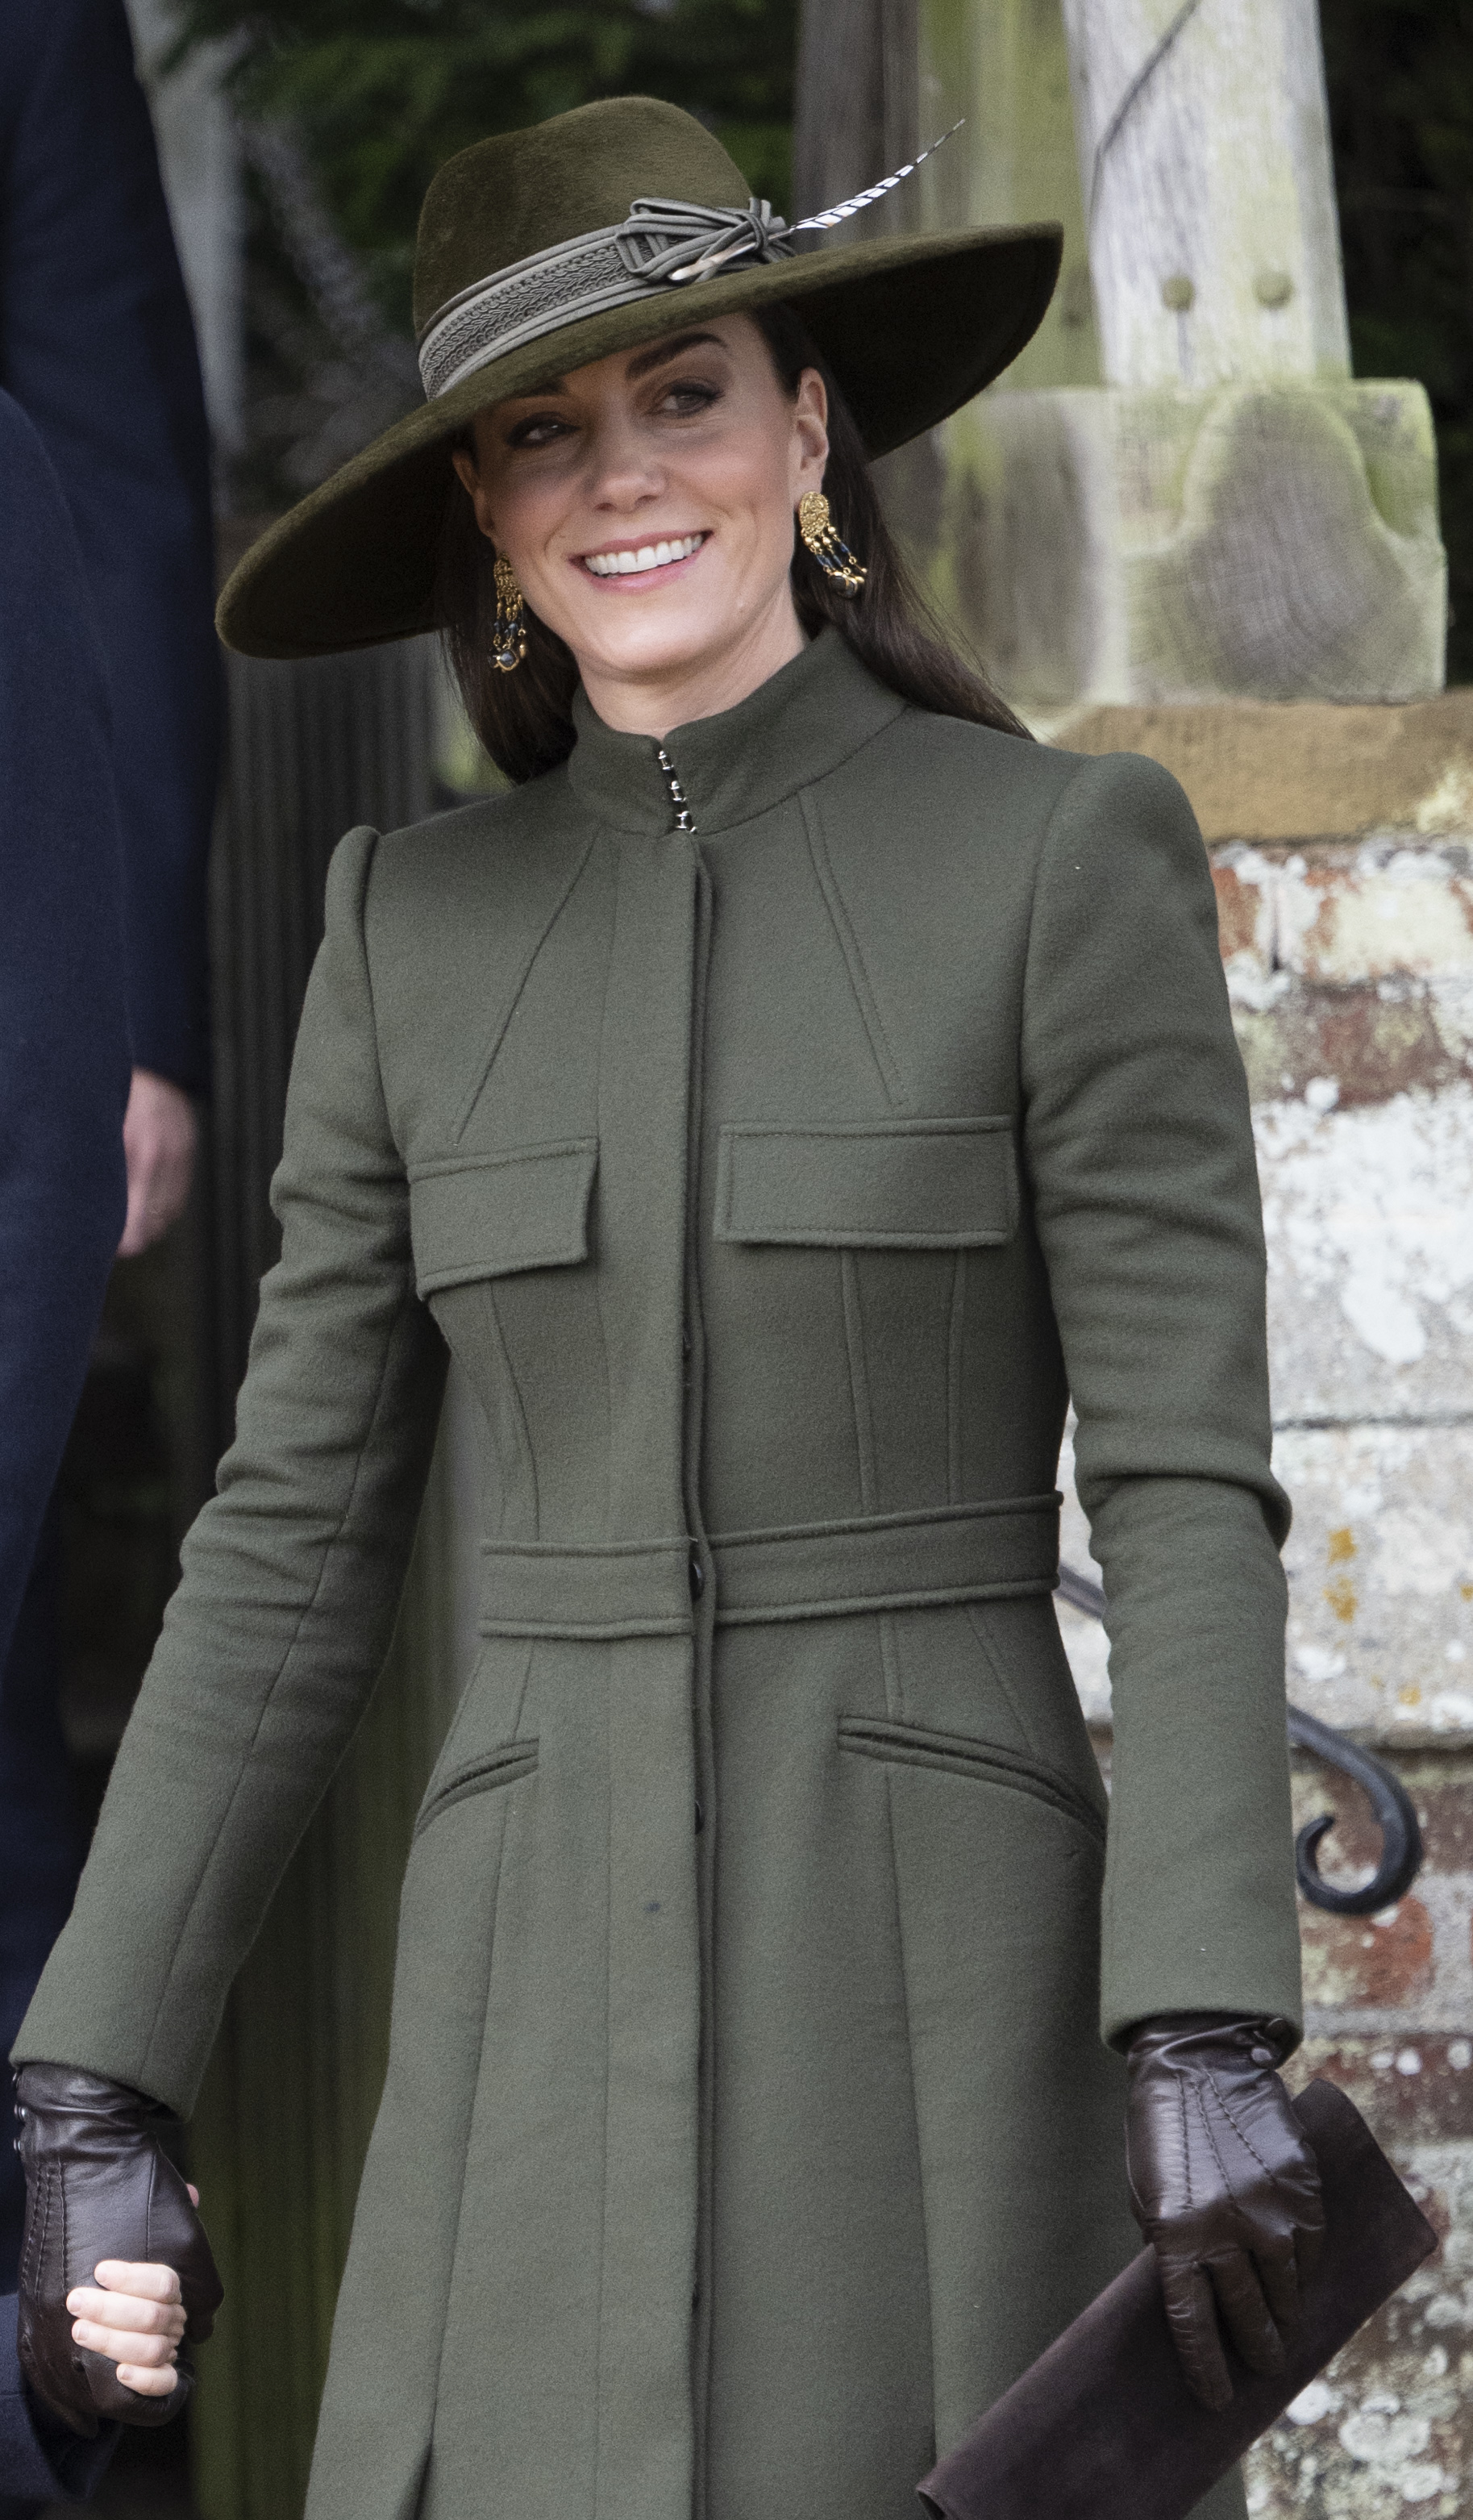 Catherine, Princess of Wales attends the Christmas Day service at St Mary Magdalene Church in Sandringham, Norfolk, on December 25, 2022. | Source: Getty Images